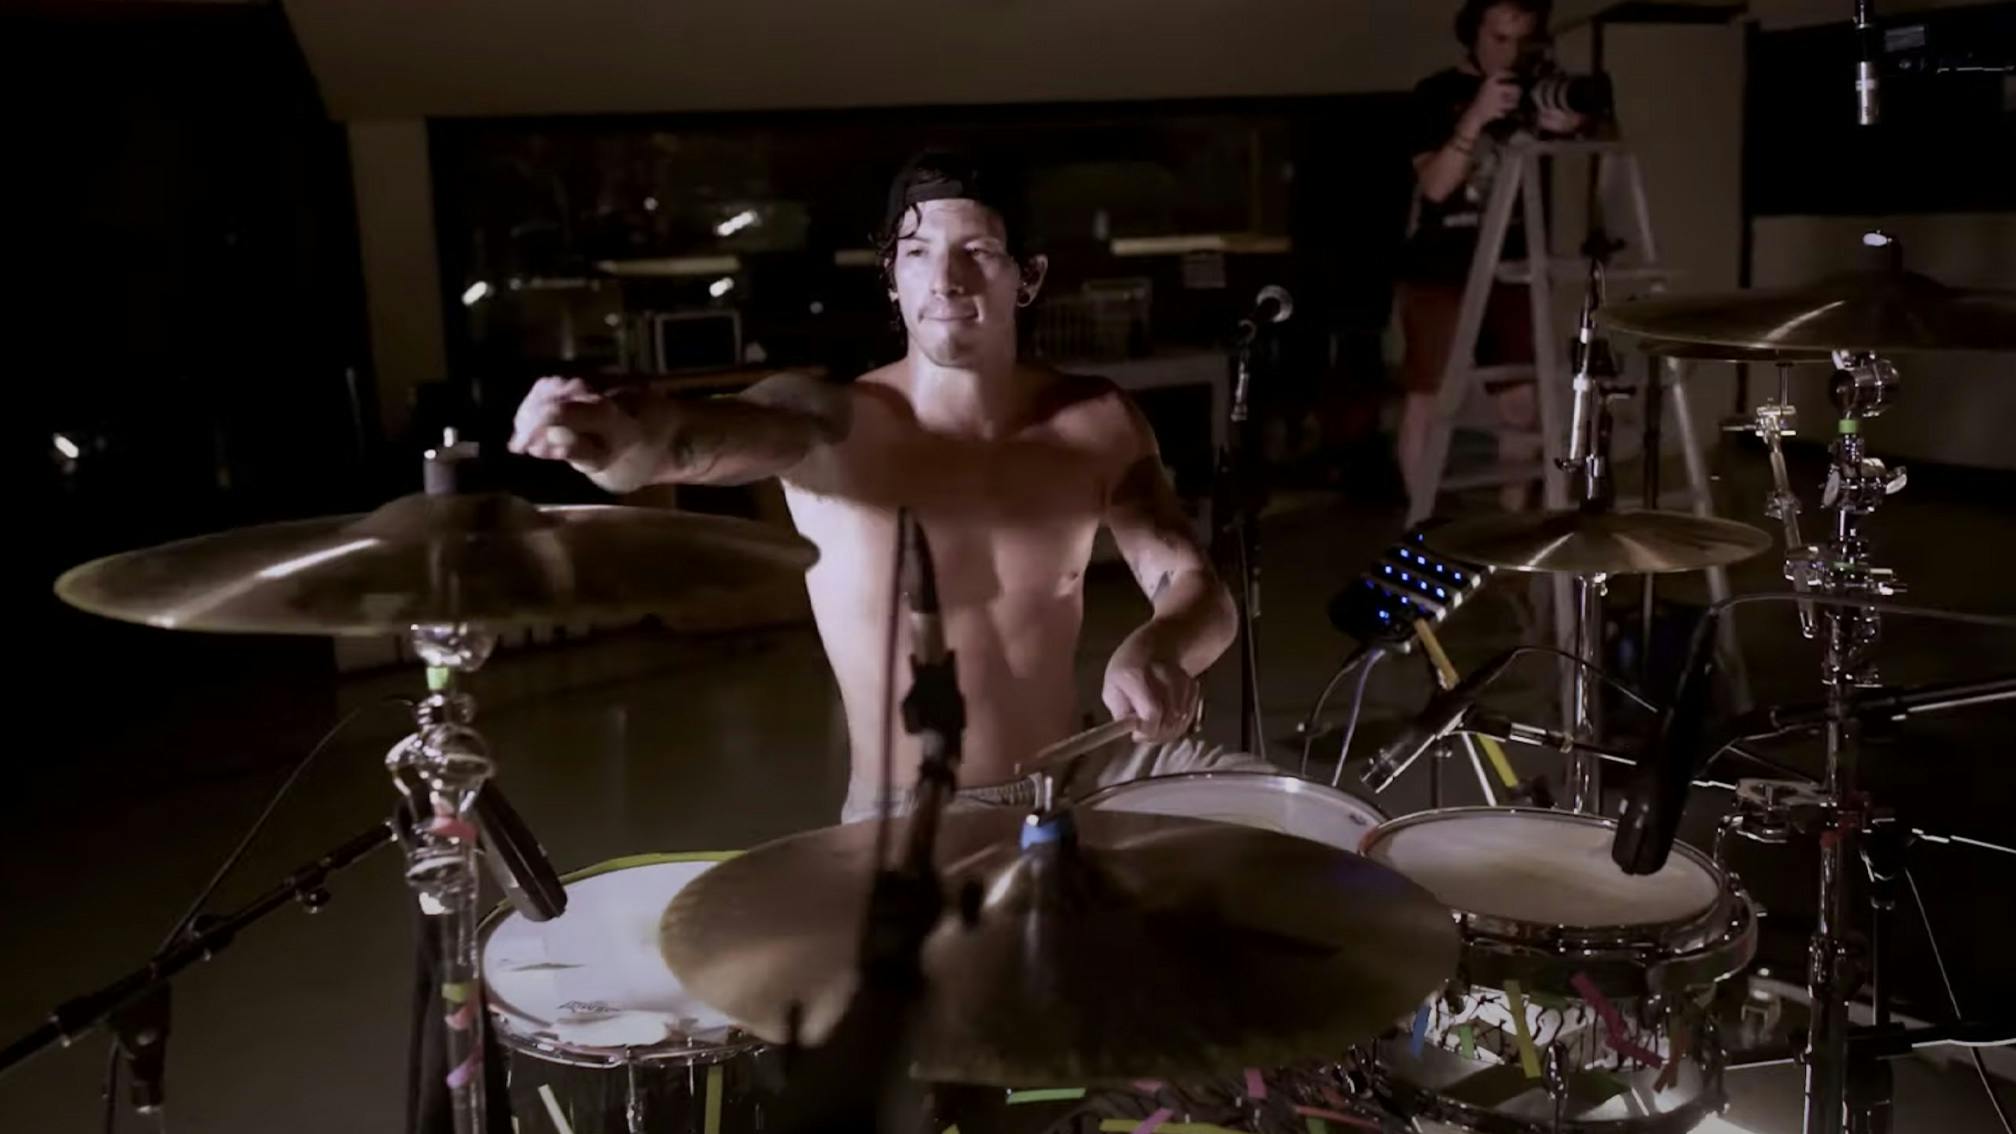 Watch twenty one pilots' Josh Dun Drum To Foo Fighters, Paramore And More